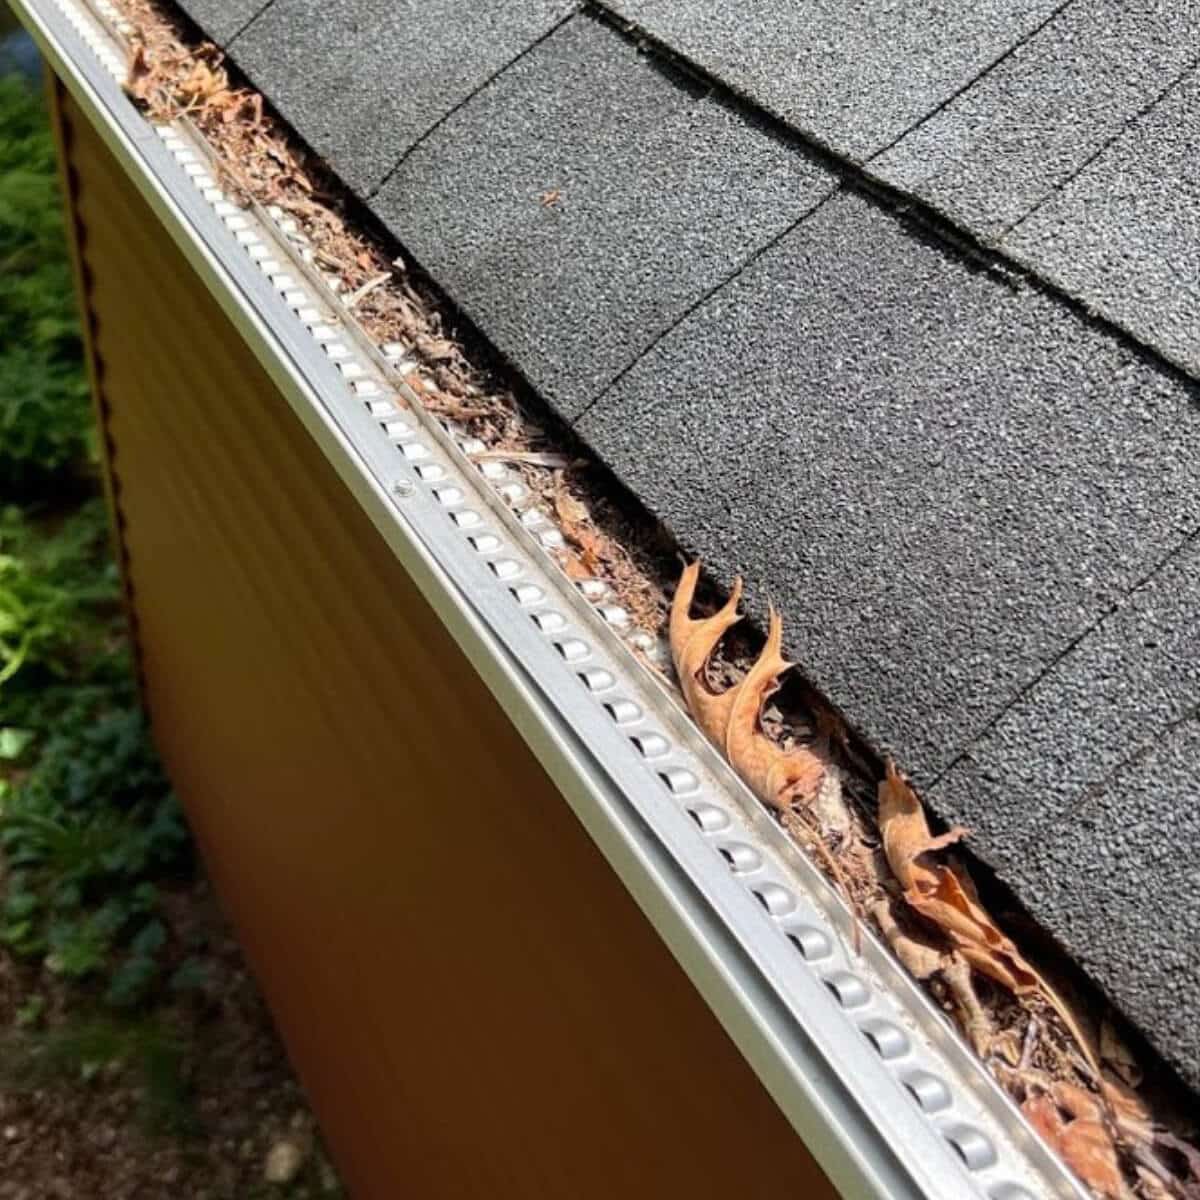 clogged gutter needing expert gutter cleaning service in lansdale pa